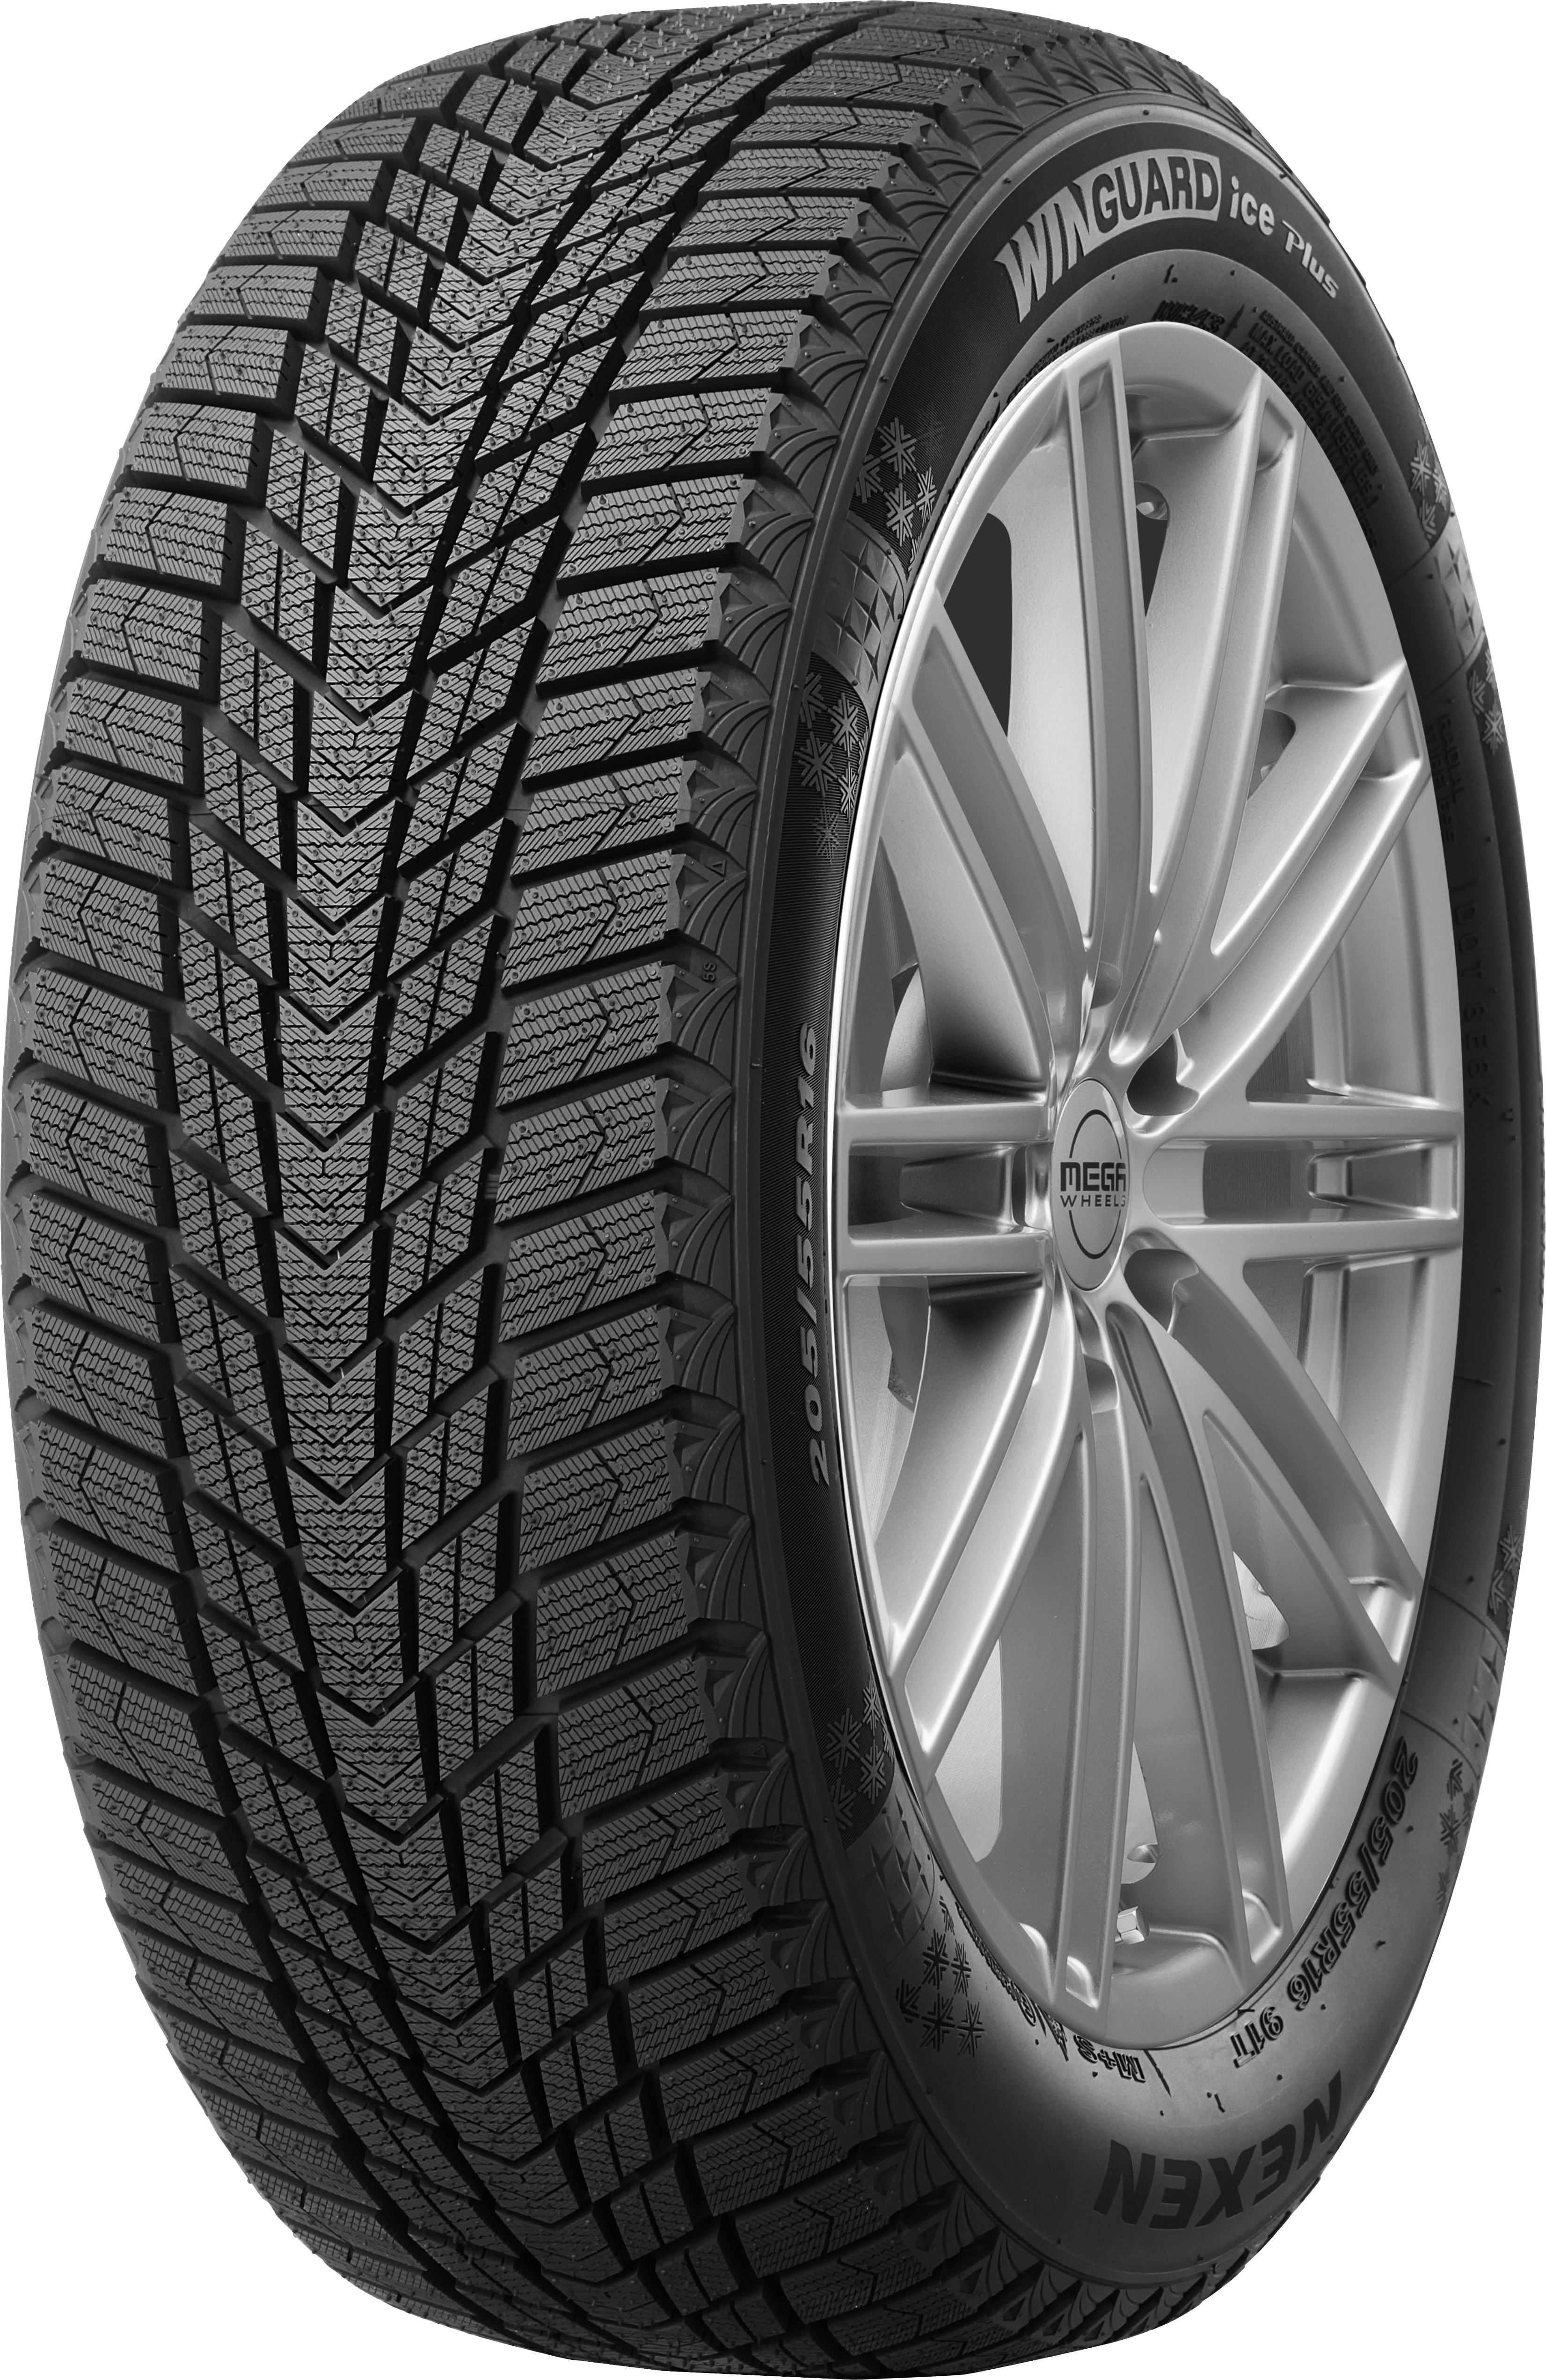 Nexen Winguard Ice Plus WH43 Tire - Reviews and Tests